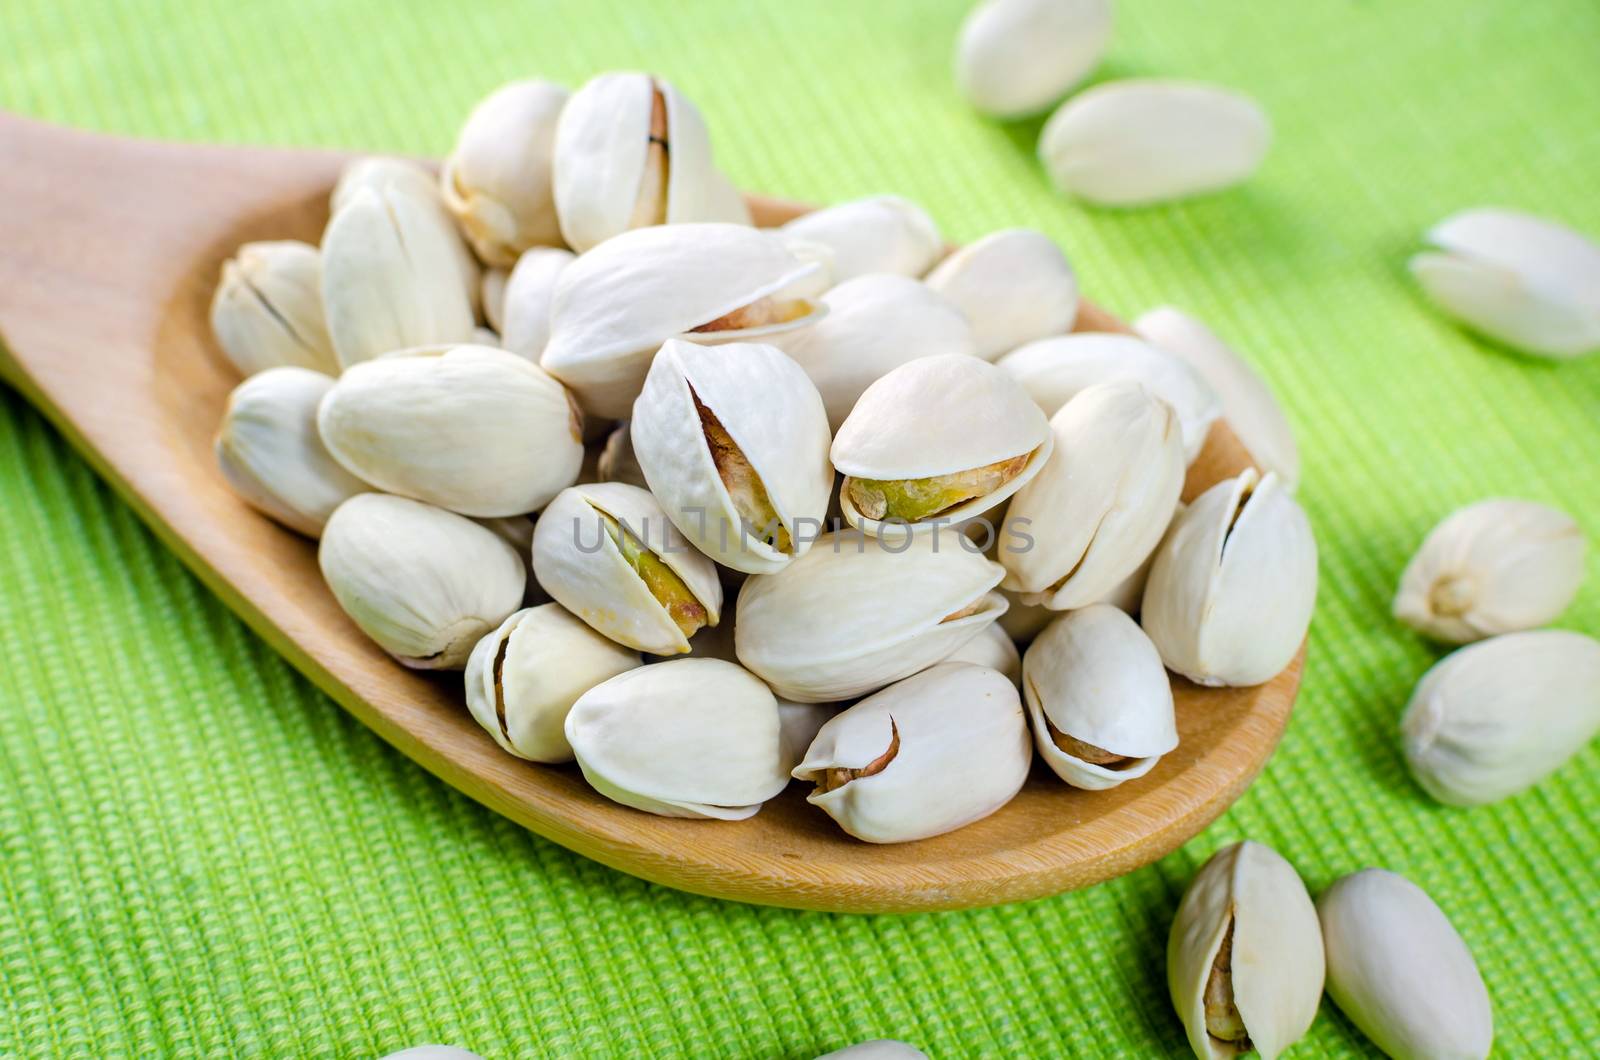 pistachio nuts in a wooden spoon on green background